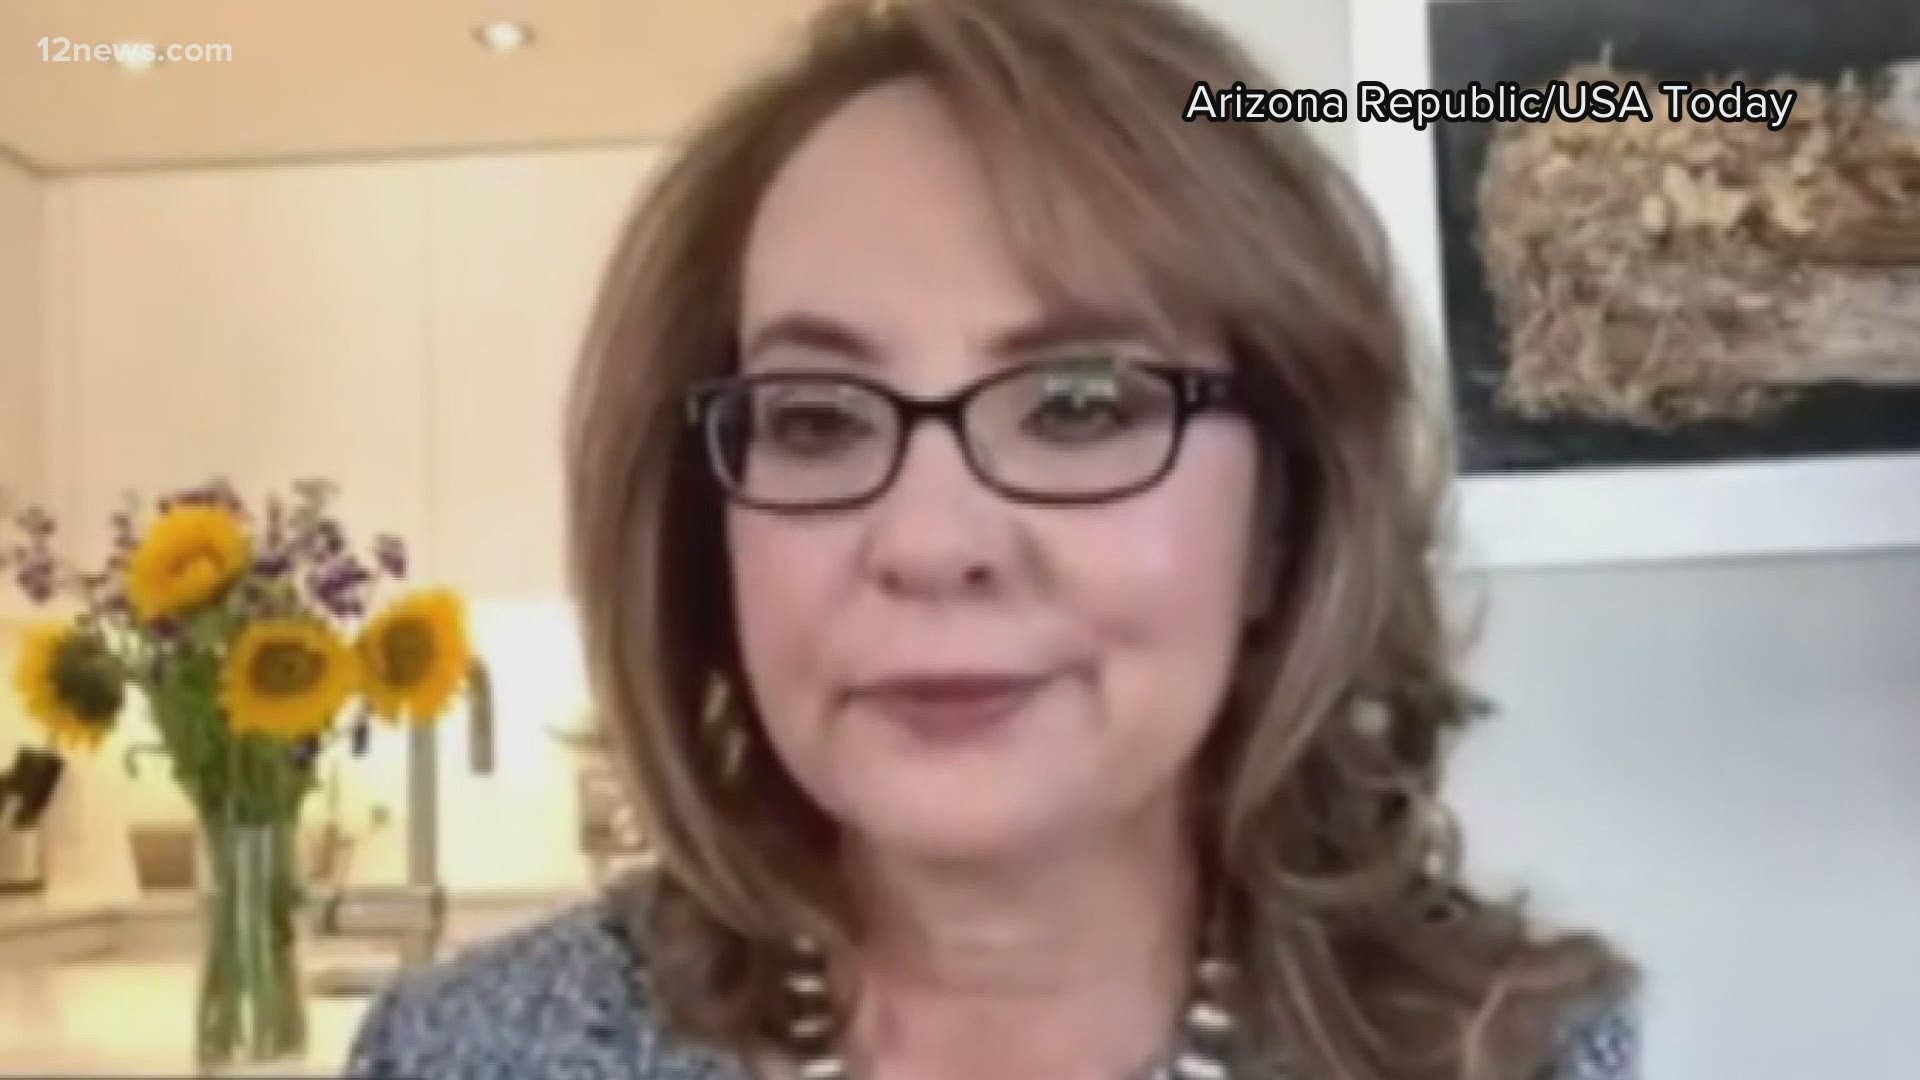 10 years ago this week, a gunman opened fire during a Congressional event outside a grocery store in Tucson. Gabby Giffords reacts to the anniversary.